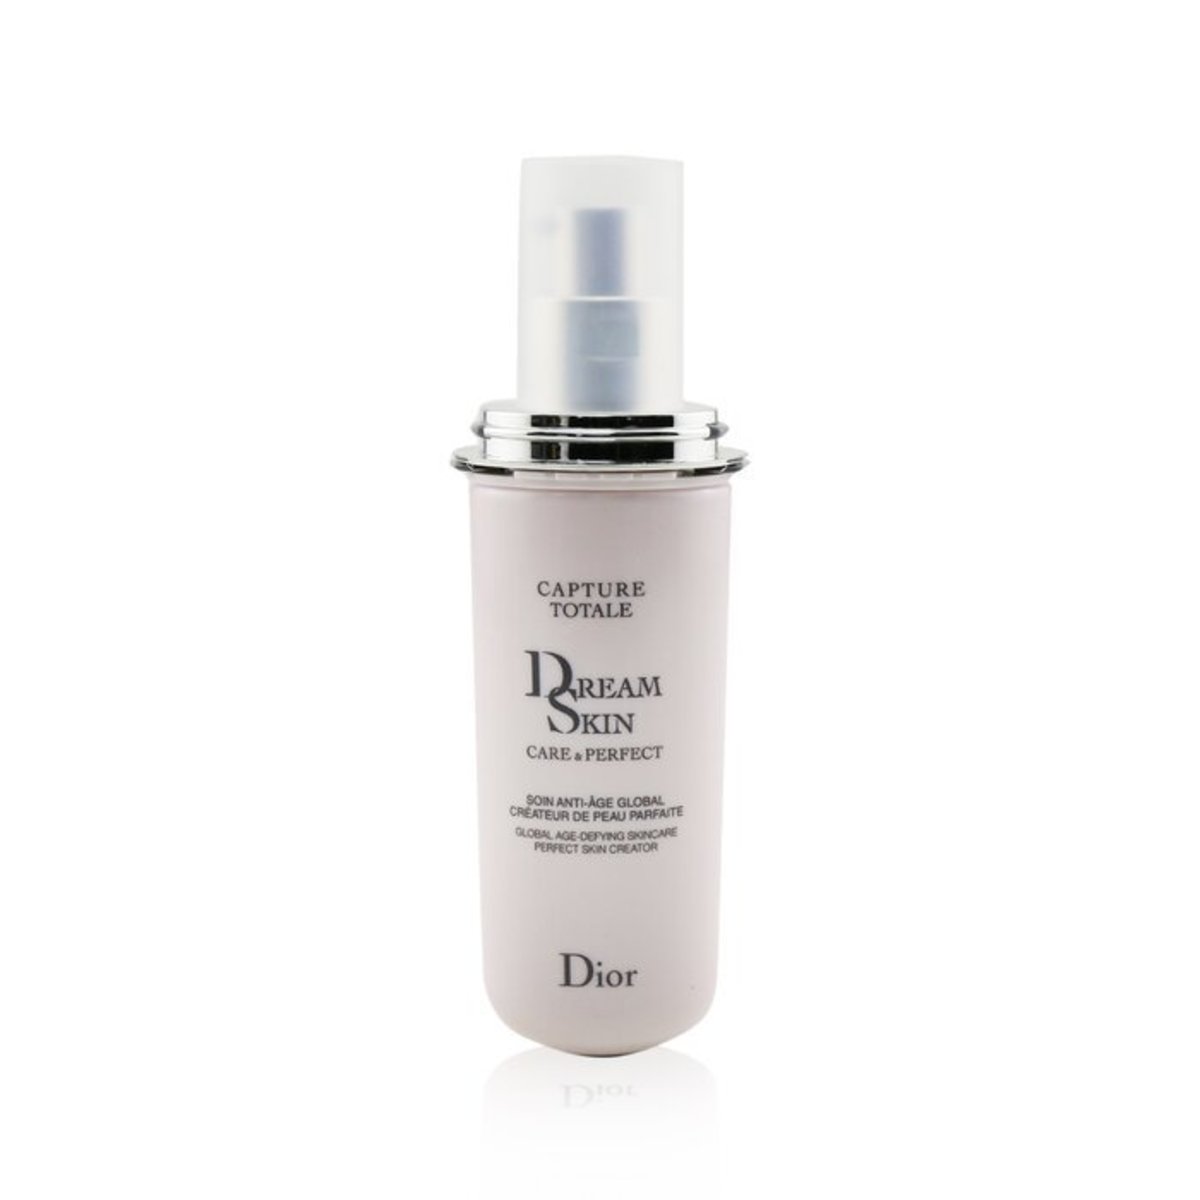 dior care and perfect